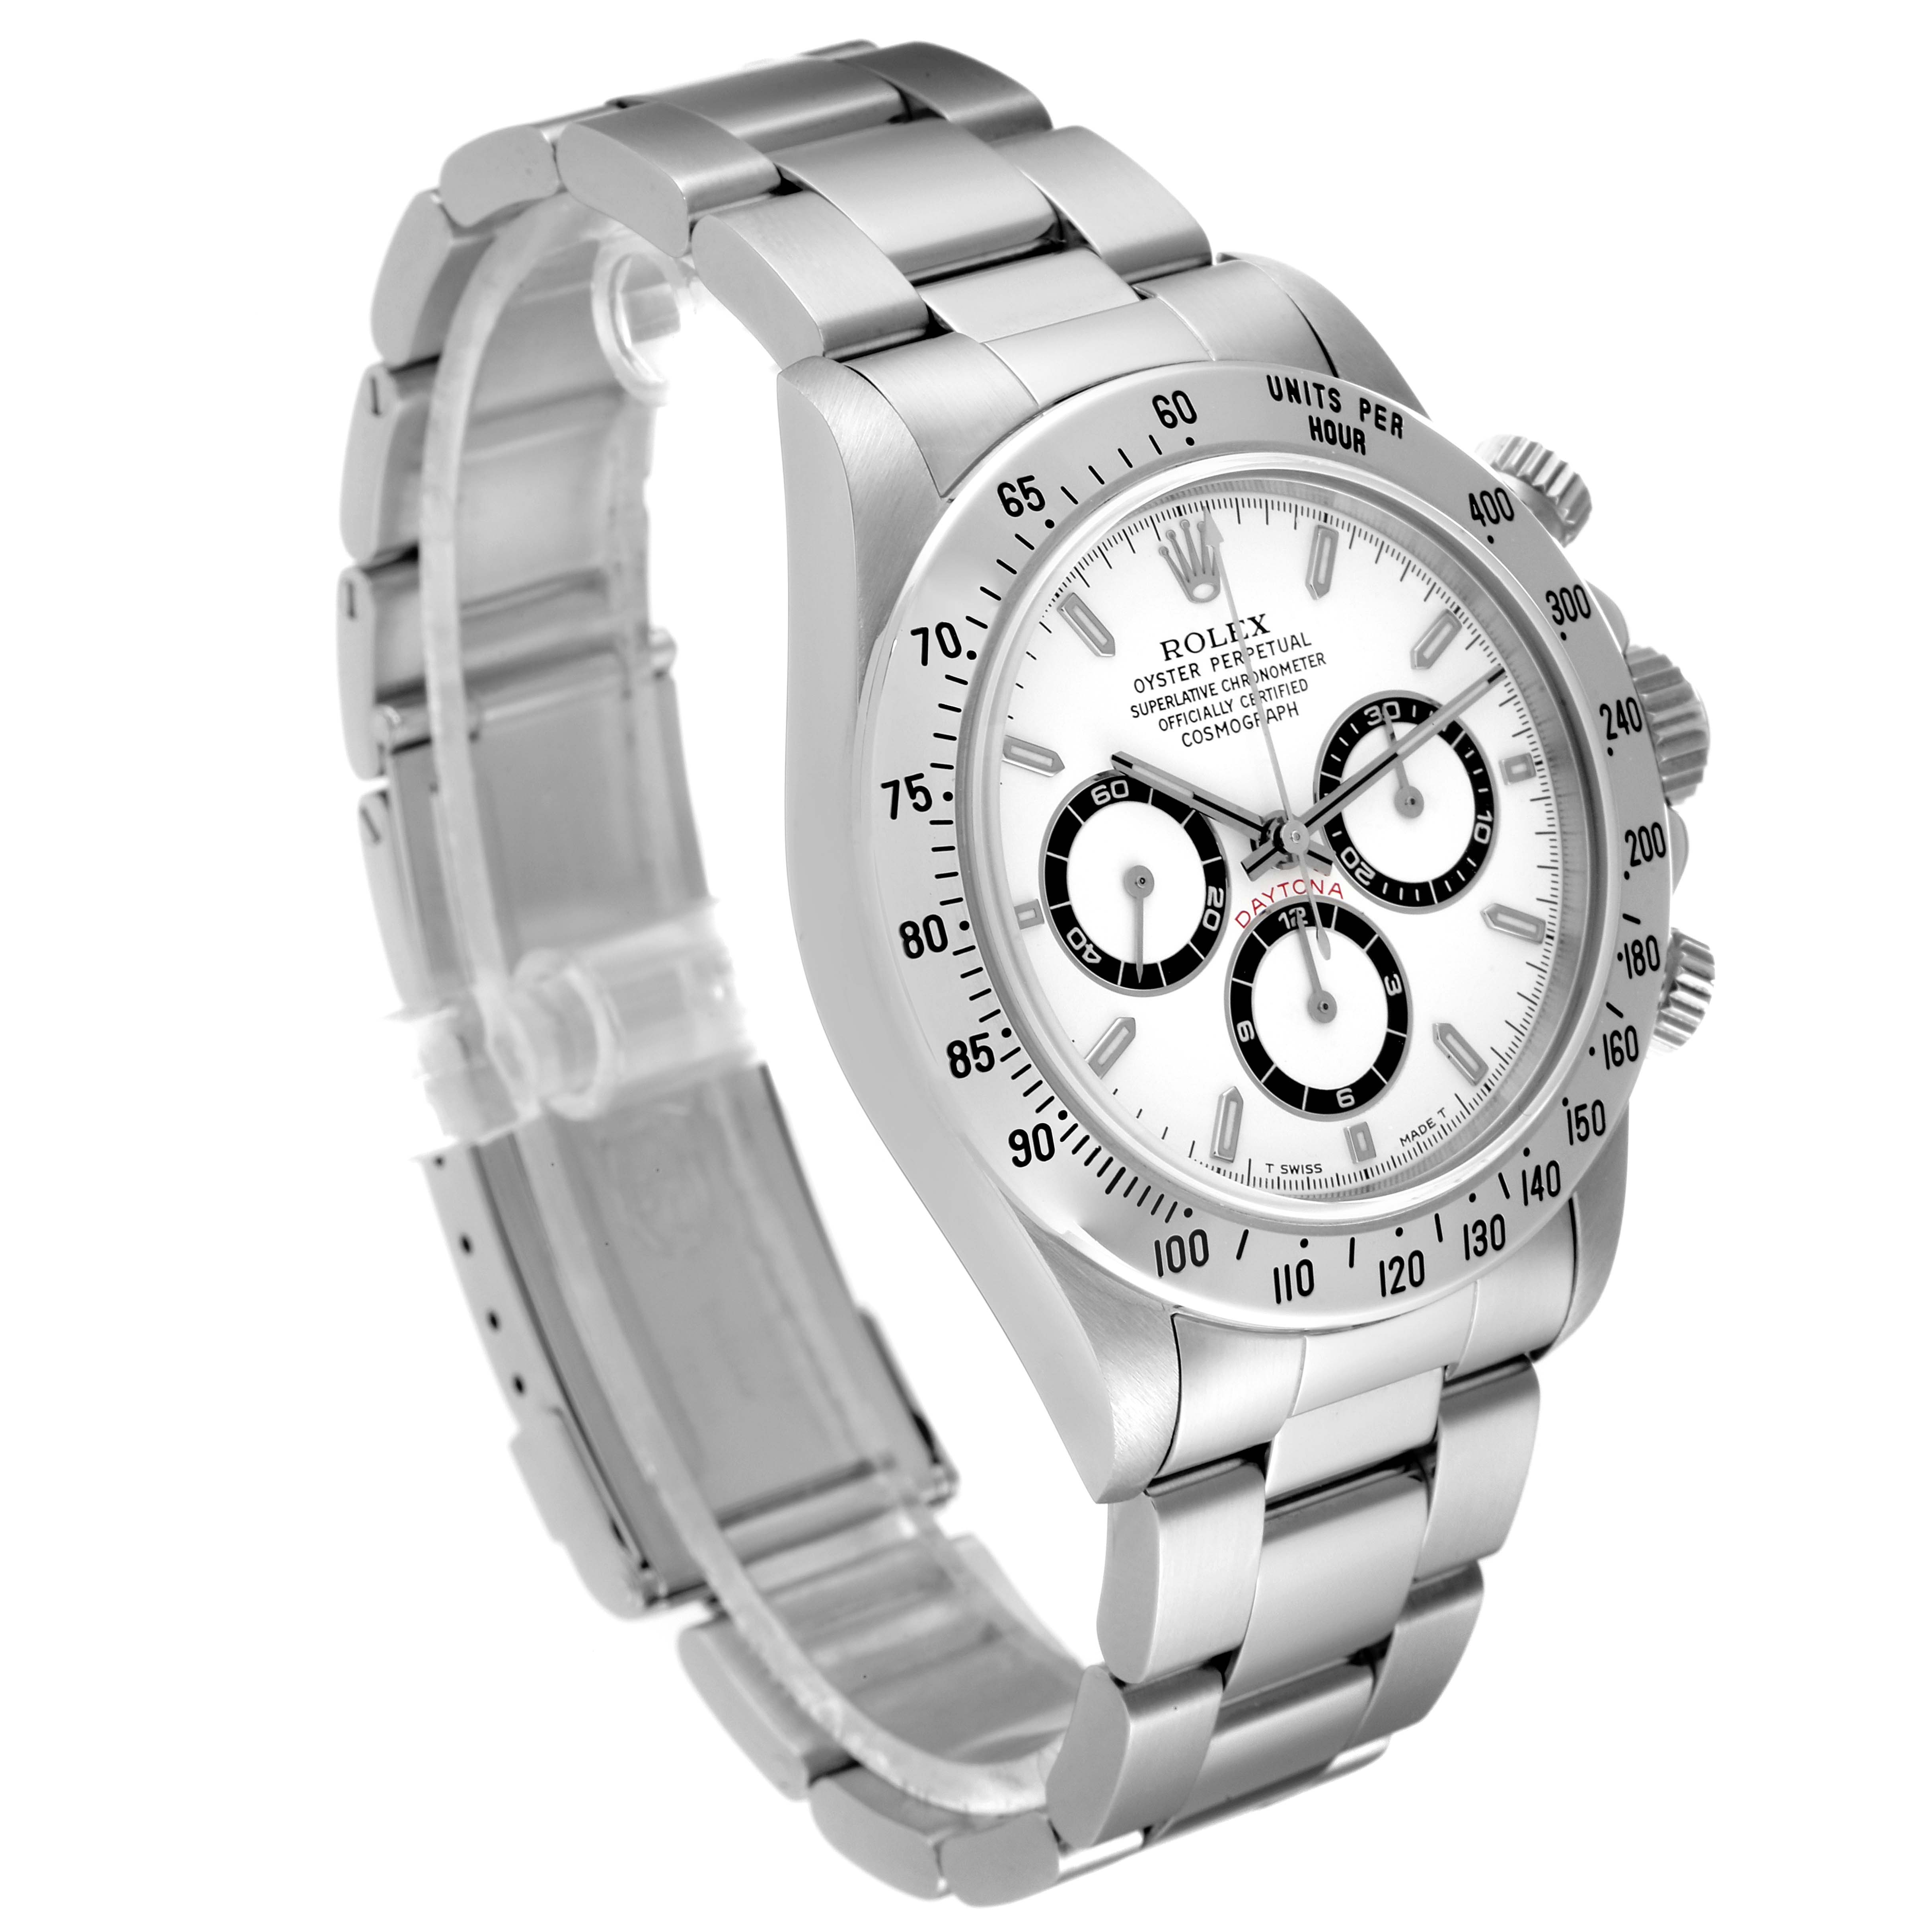 Rolex White Stainless Steel Cosmograph Daytona 116520 Automatic Men's Wristwatch 40 Mm